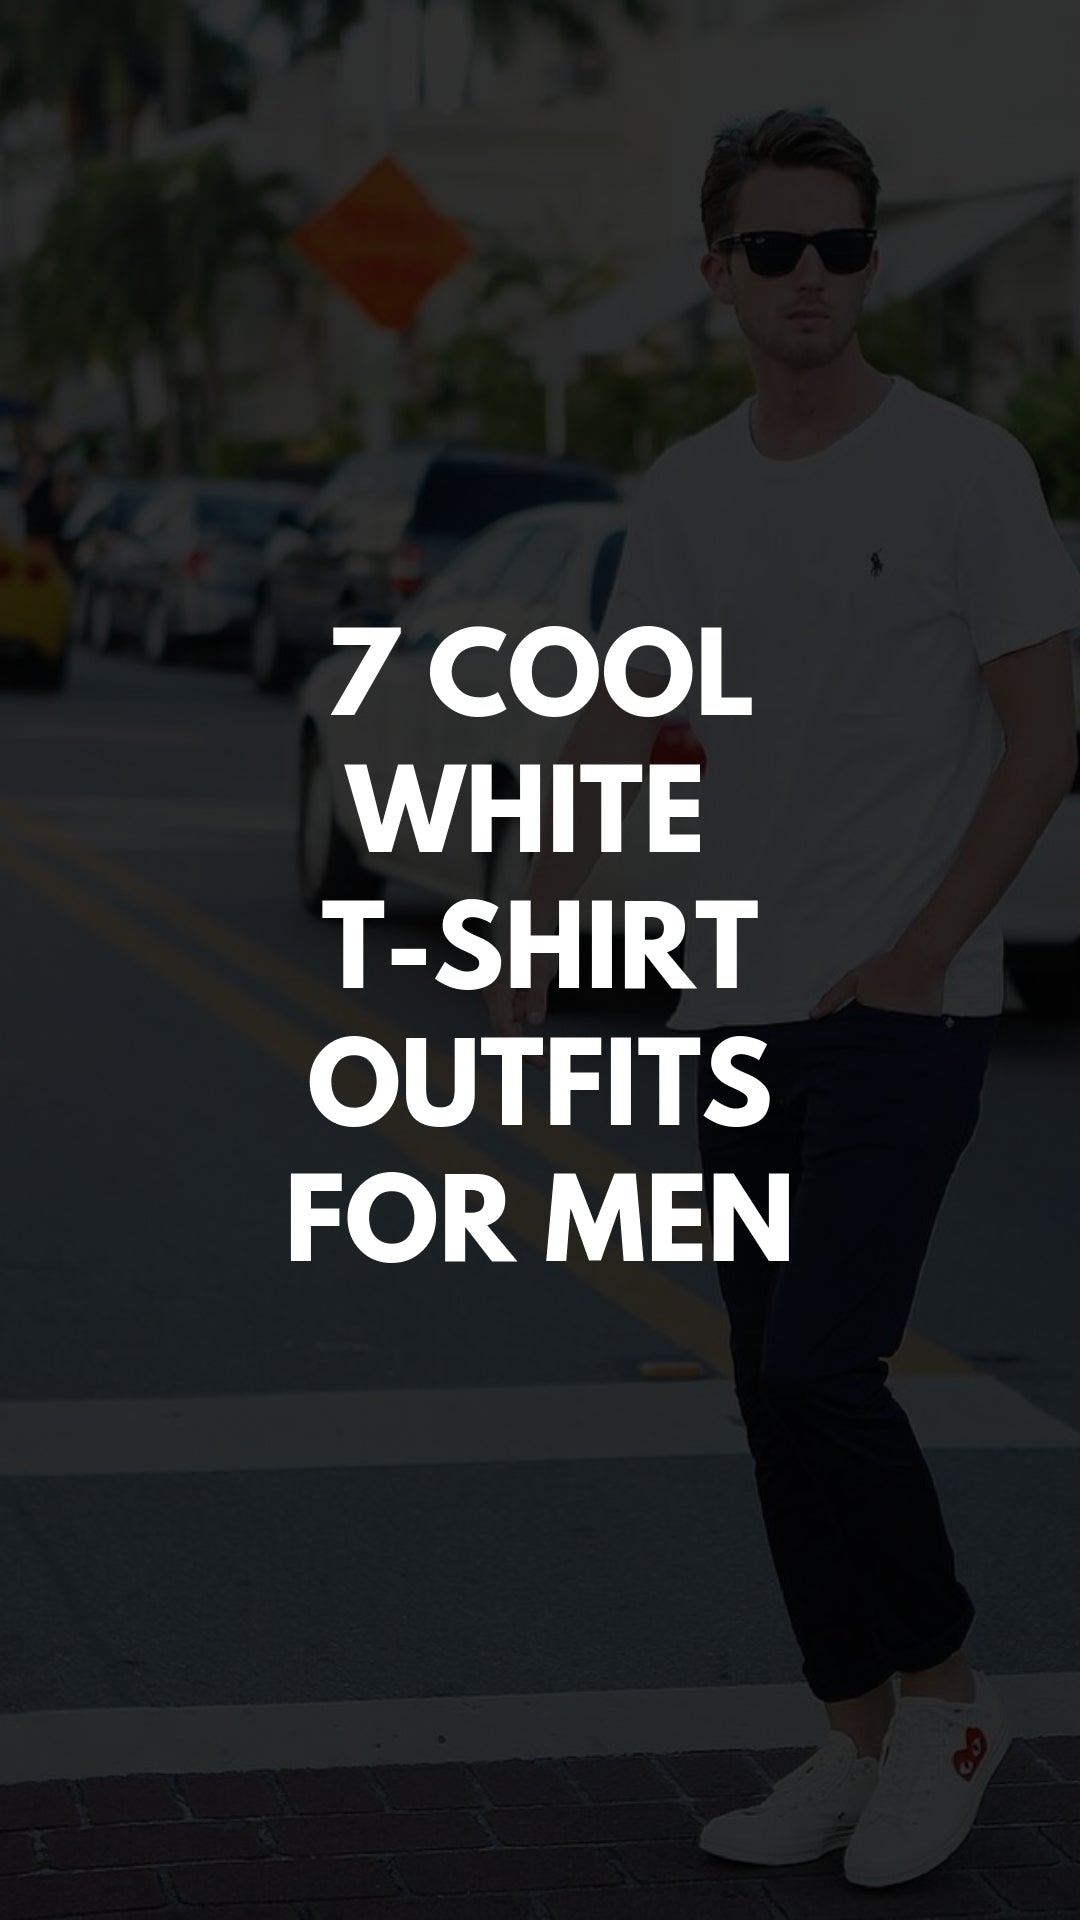 7 COOL WHITE   T-SHIRT OUTFITS FOR MEN